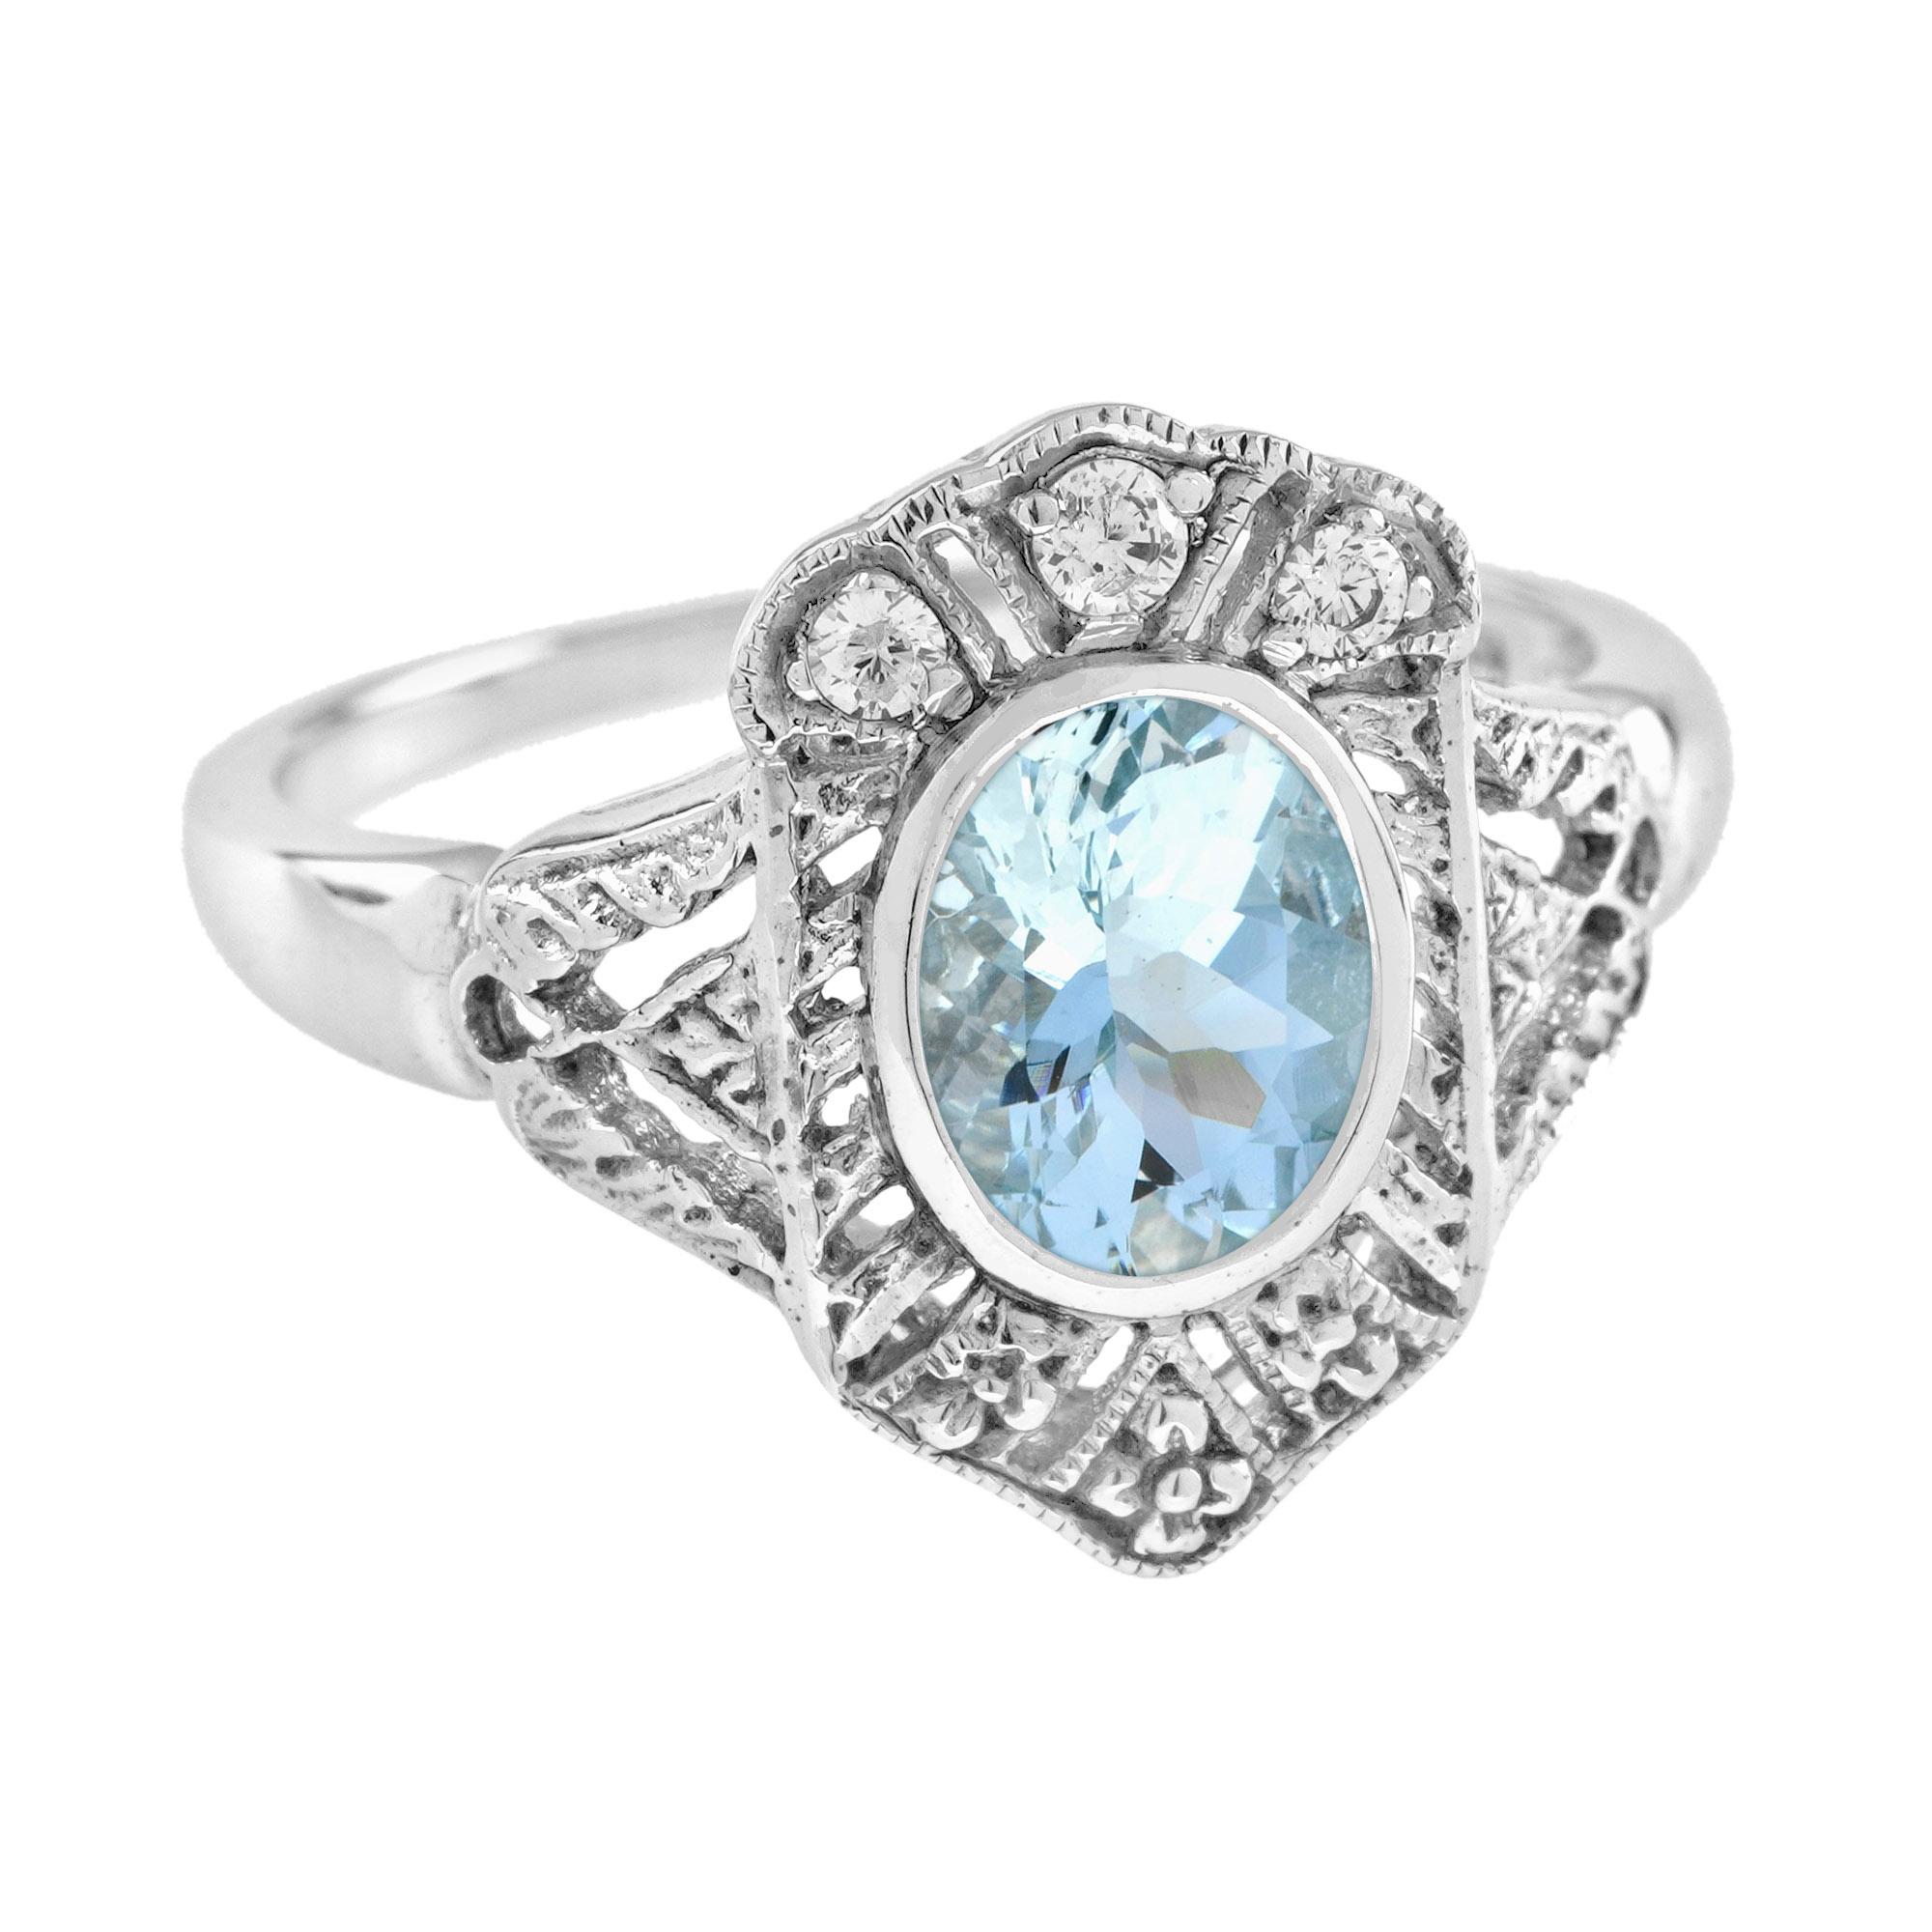 Oval Cut 1.5 Ct. Aquamarine and Diamond Art Deco Style Engagement Ring in 14K White Gold For Sale